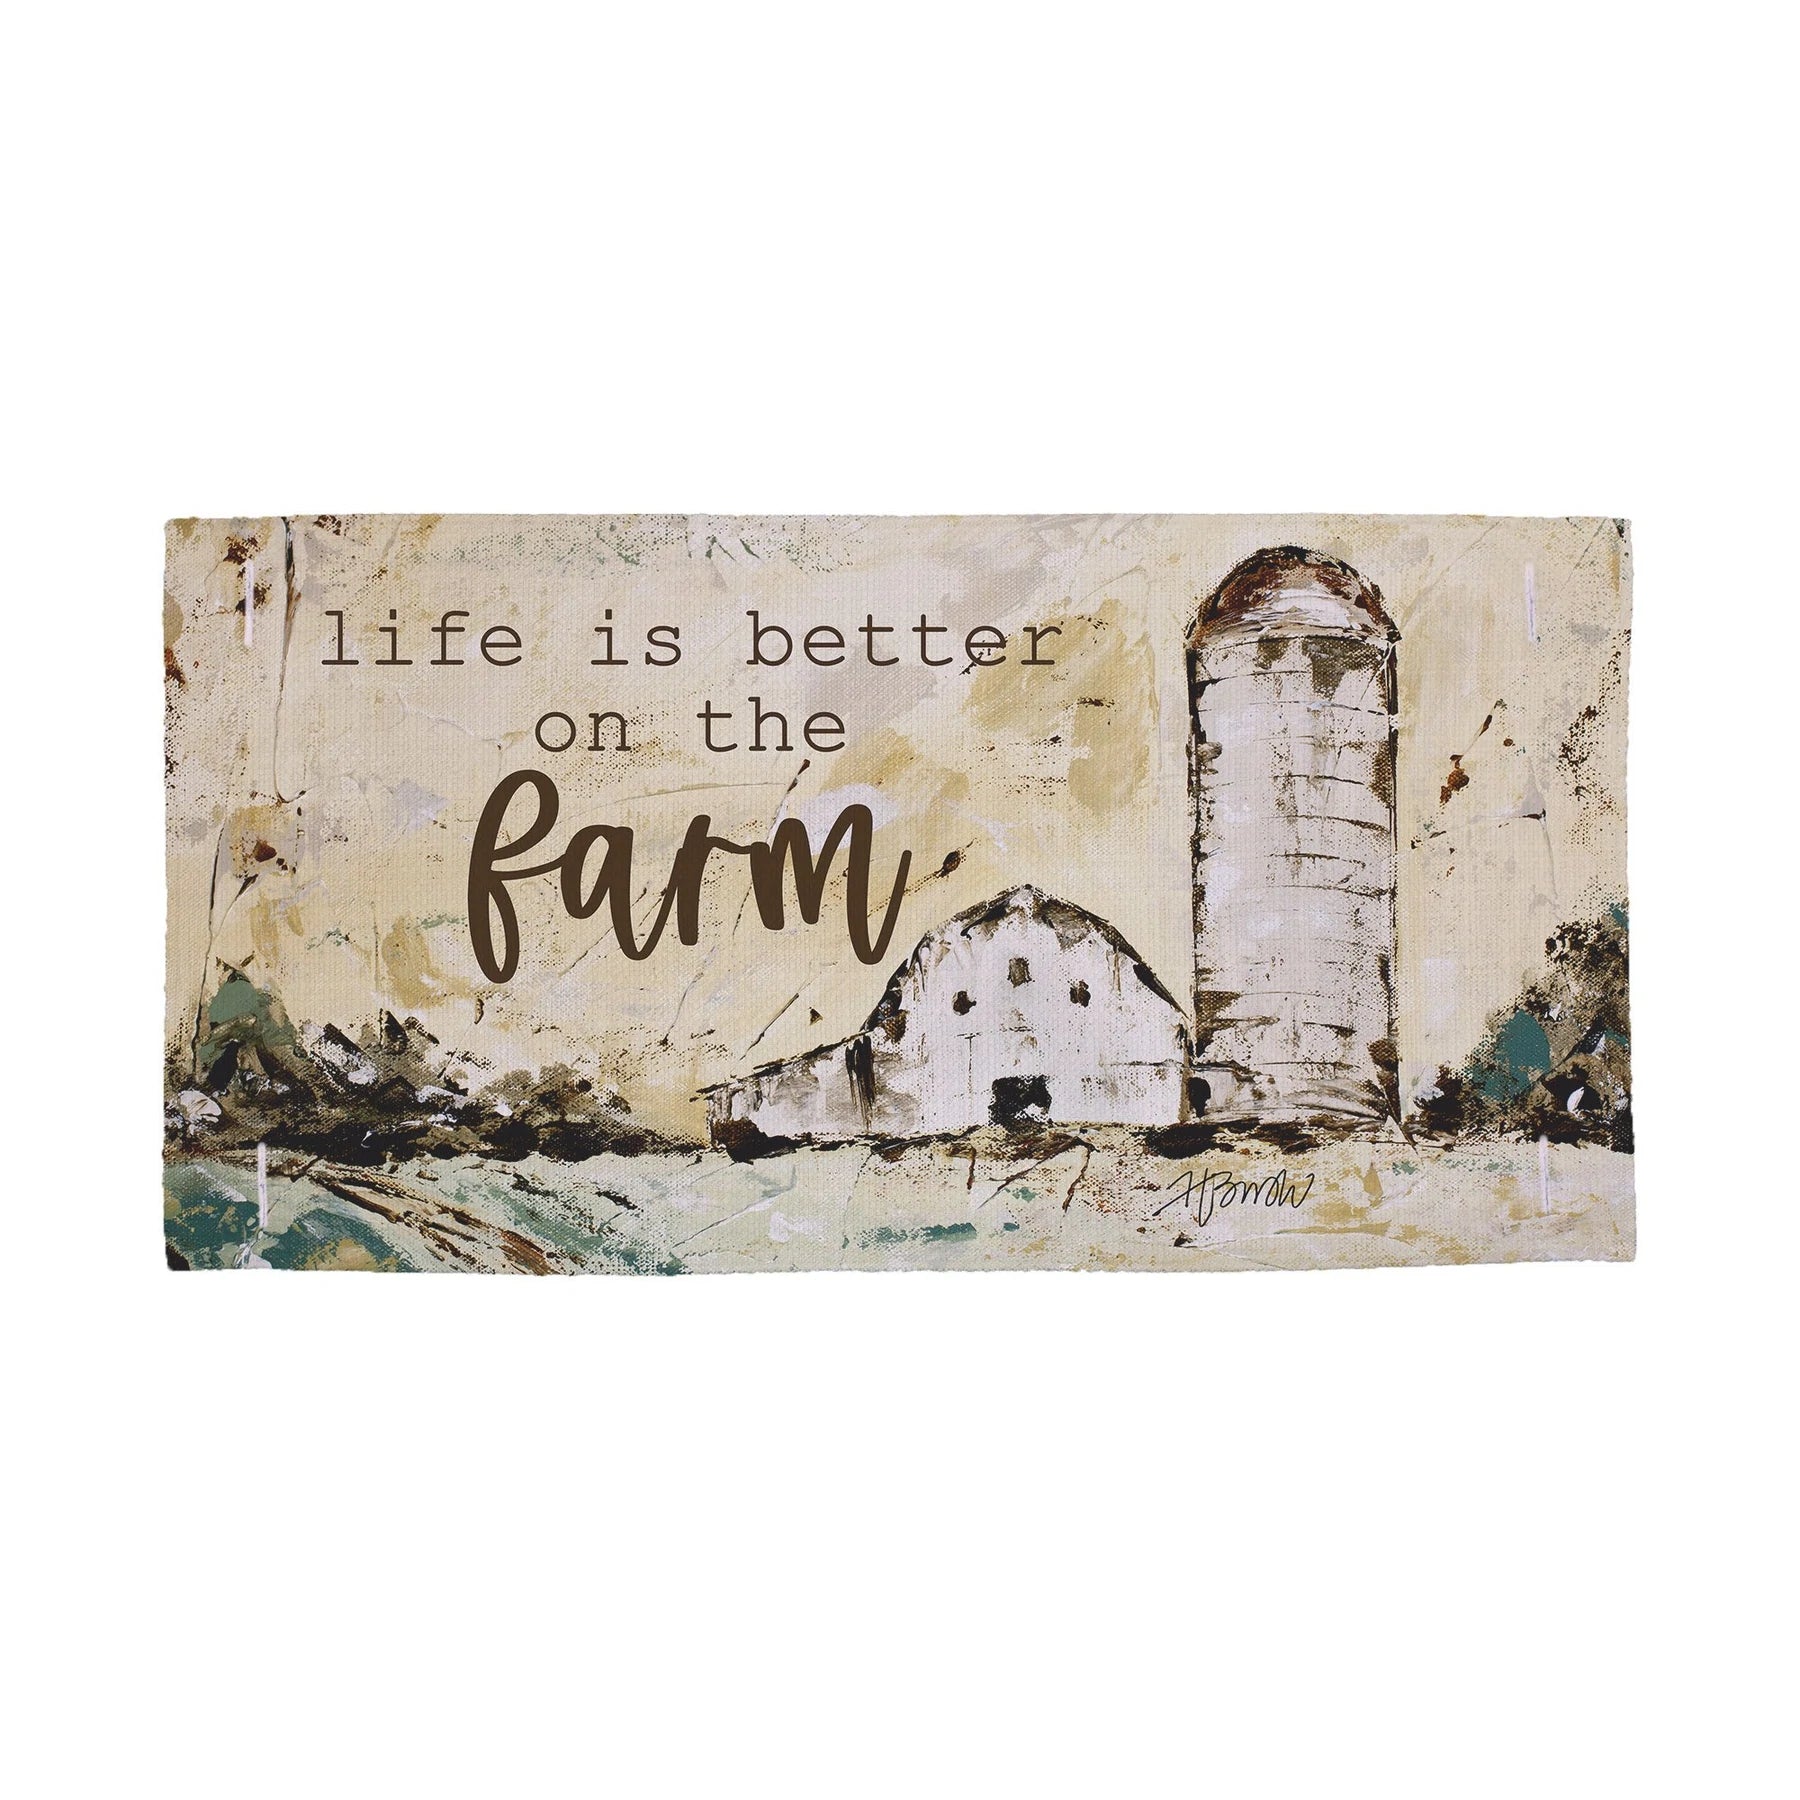 Life is better on the farm pillow swap with old white barn background